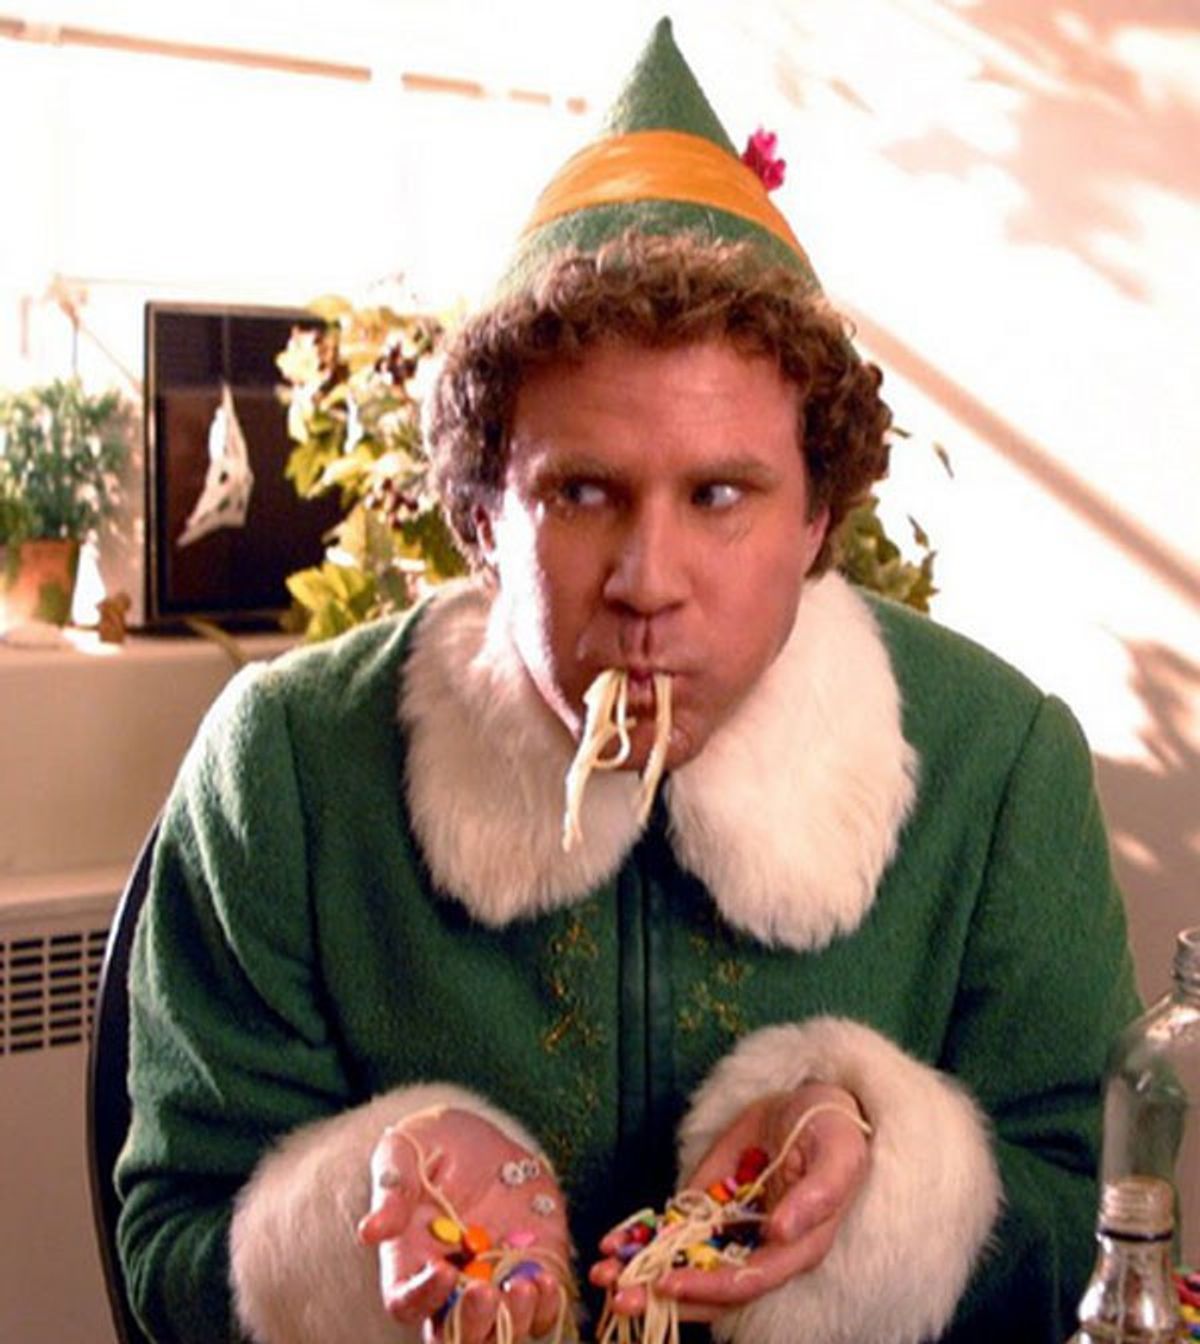 10 Things To Know About The Freshman 15, As Told By 'Elf'